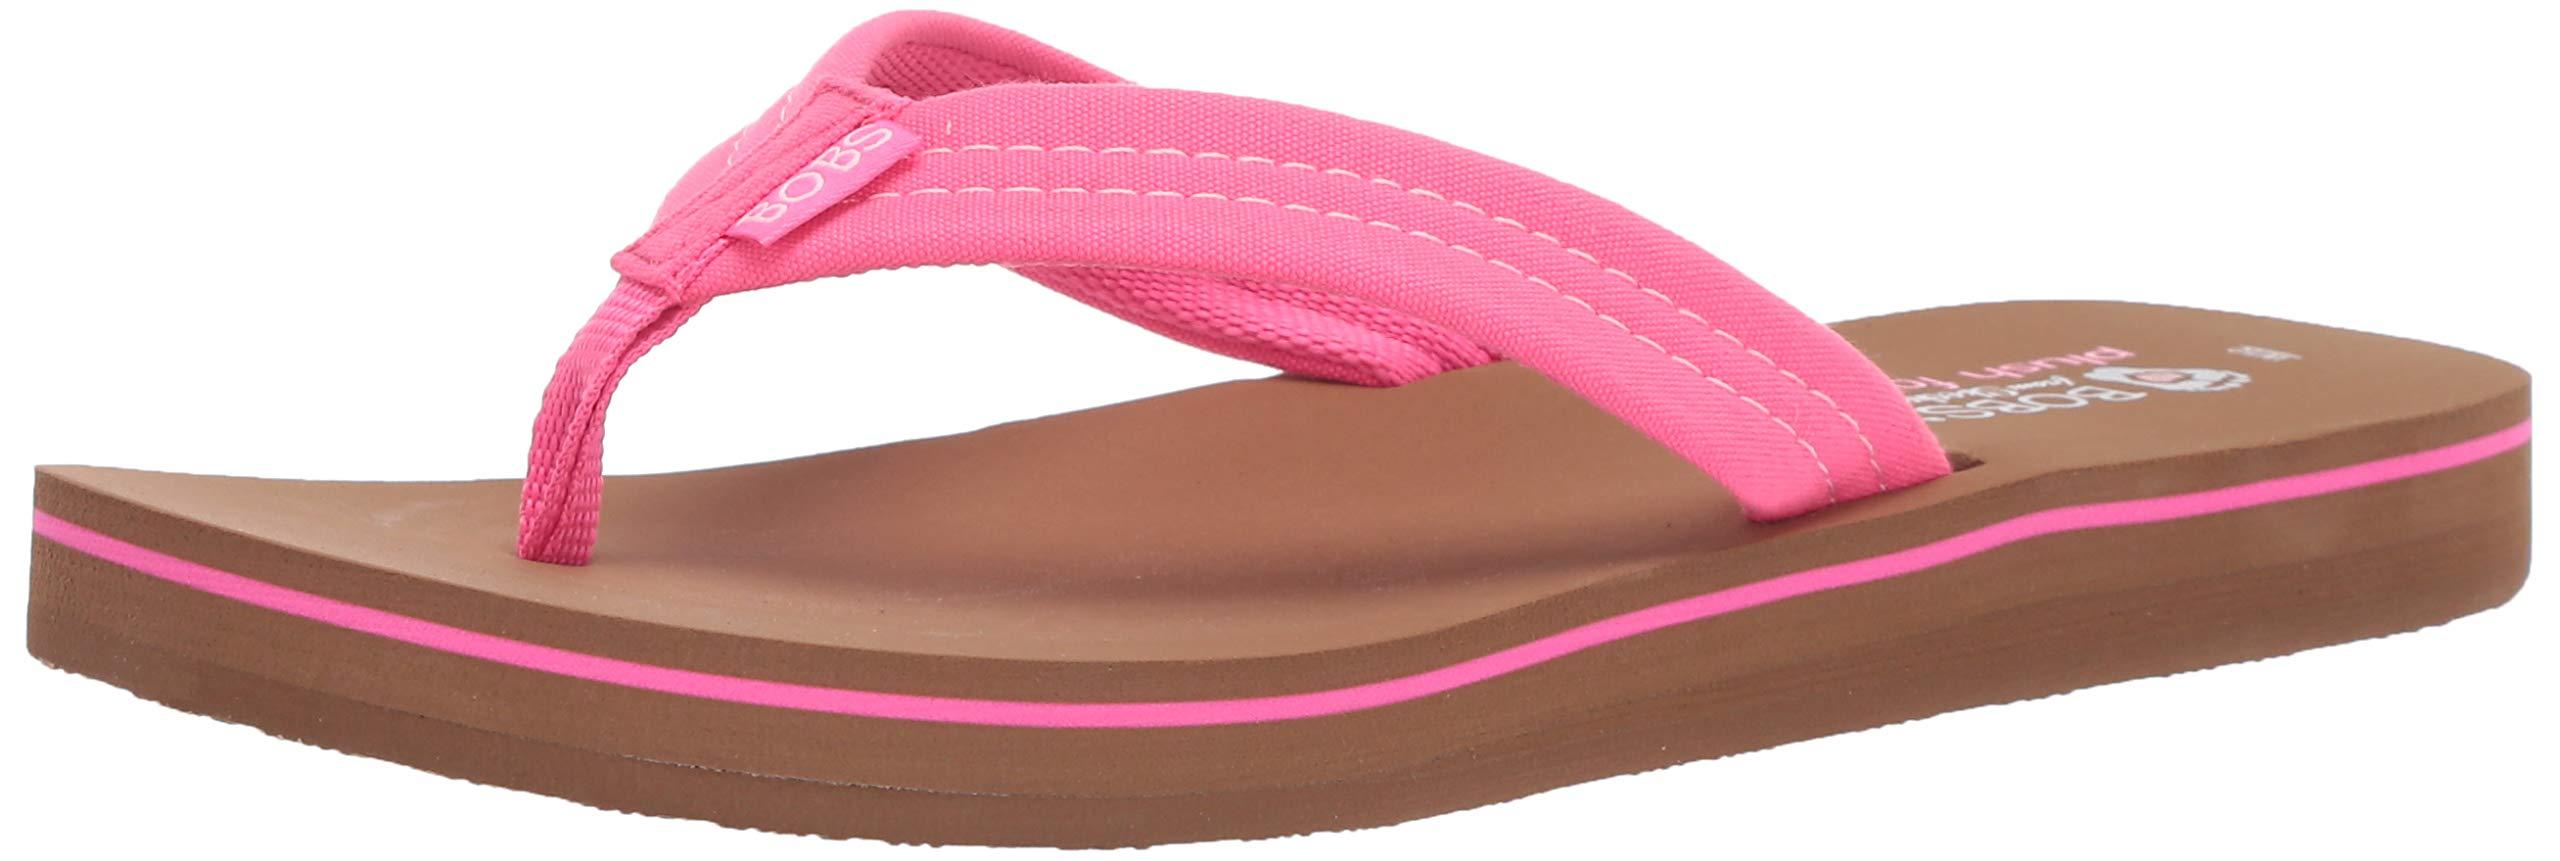 Skechers Synthetic Bobs Bobs Sunset Flip-flop in Neon Pink (Pink ...